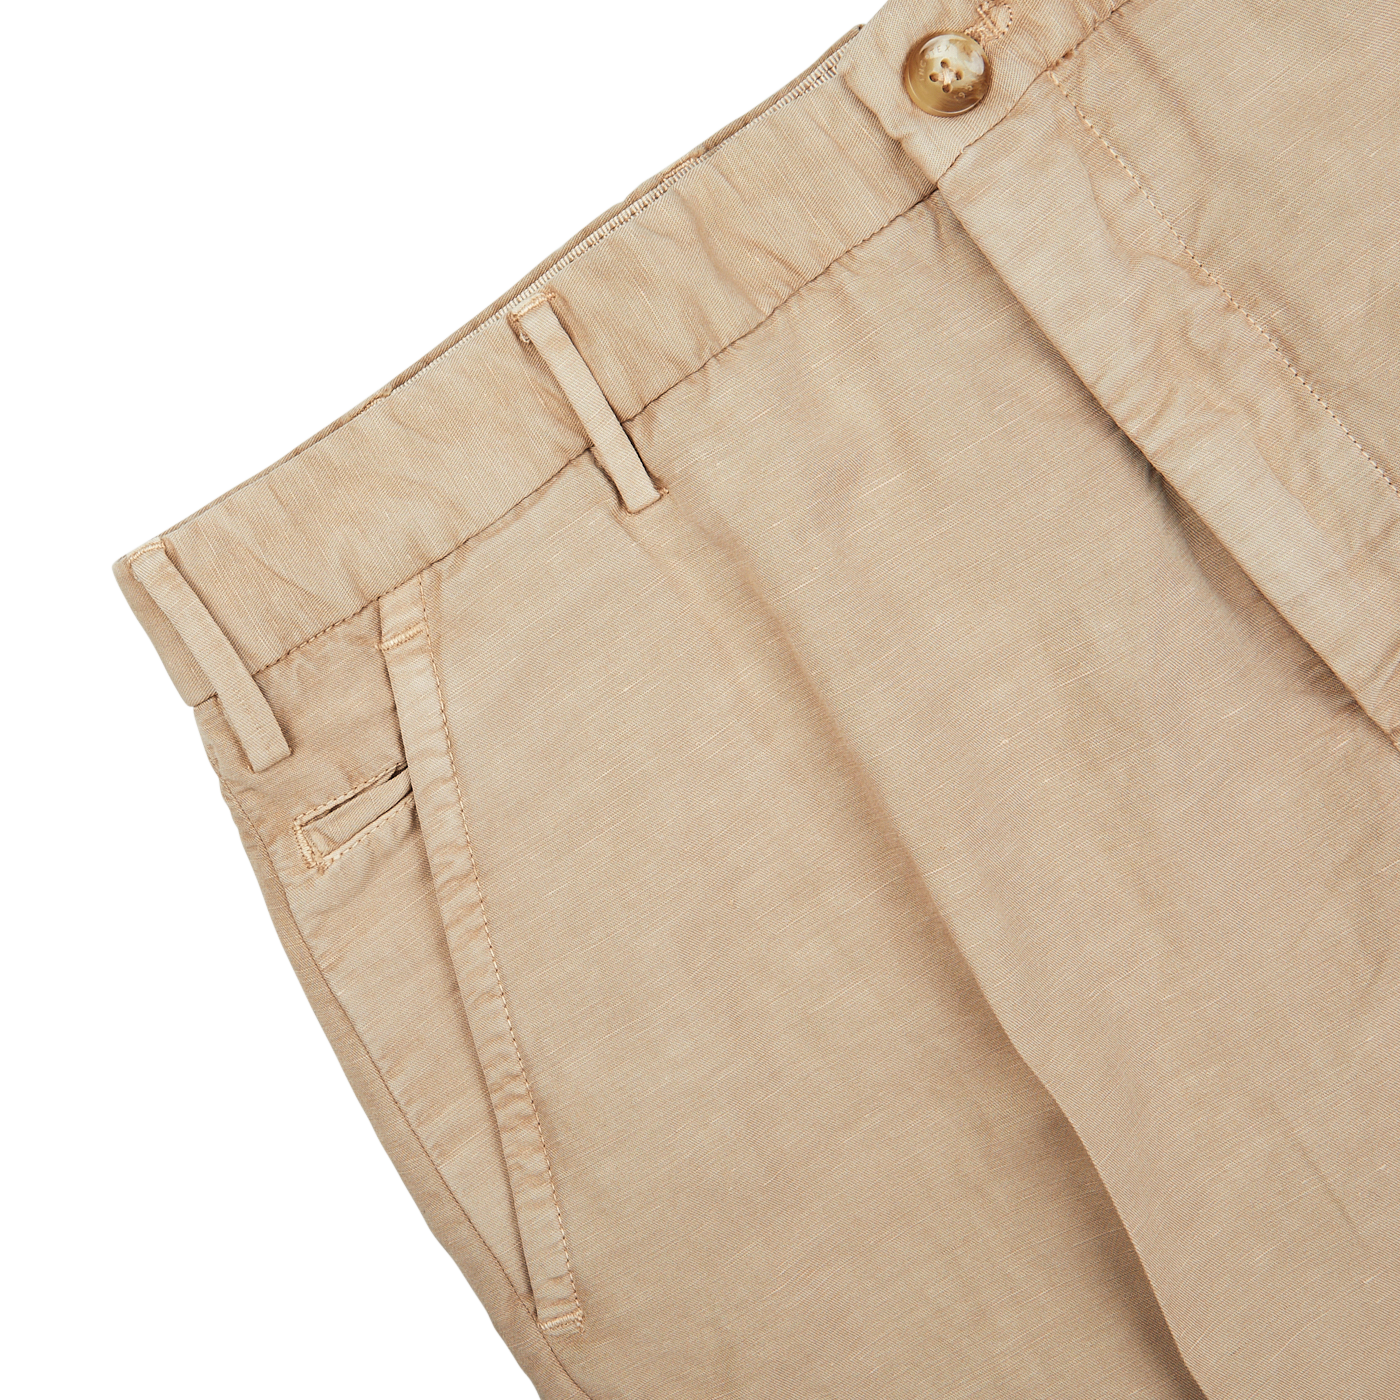 Sentence with replaced product name and brand name: Light Beige Chinolino Straight Fit Trousers by Incotex with a button and pocket detail displayed on a white background.